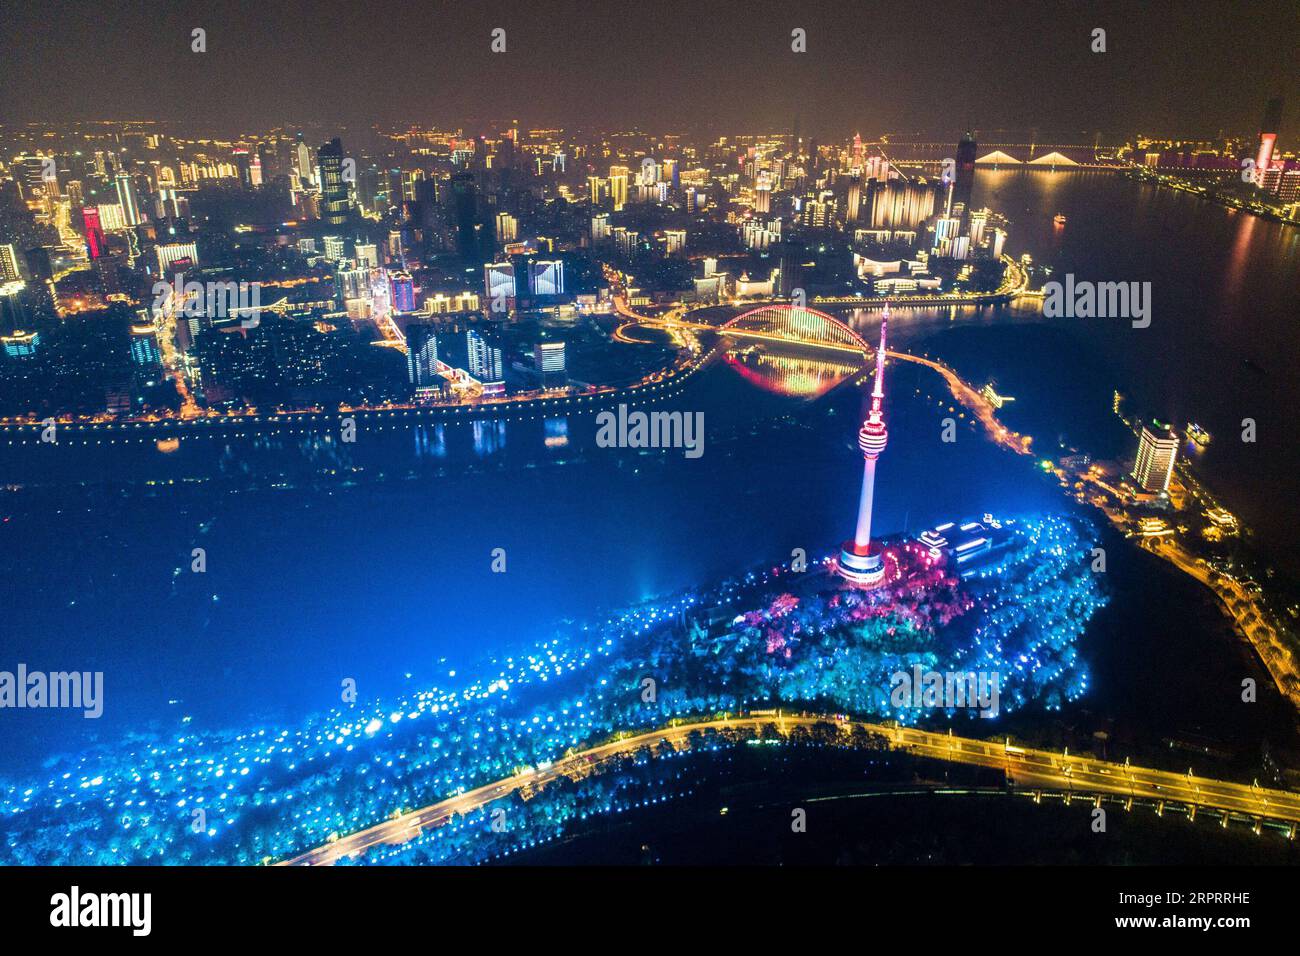 200408 -- WUHAN, April 8, 2020 -- Aerial photo taken on April 7, 2020 shows a night view in Wuhan, central China s Hubei Province. Wuhan, the megacity in central China, started lifting outbound travel restrictions from Wednesday after almost 11 weeks of lockdown to stem the spread of COVID-19.  CHINA-HUBEI-WUHAN-NIGHT VIEWCN XiaoxYijiu PUBLICATIONxNOTxINxCHN Stock Photo